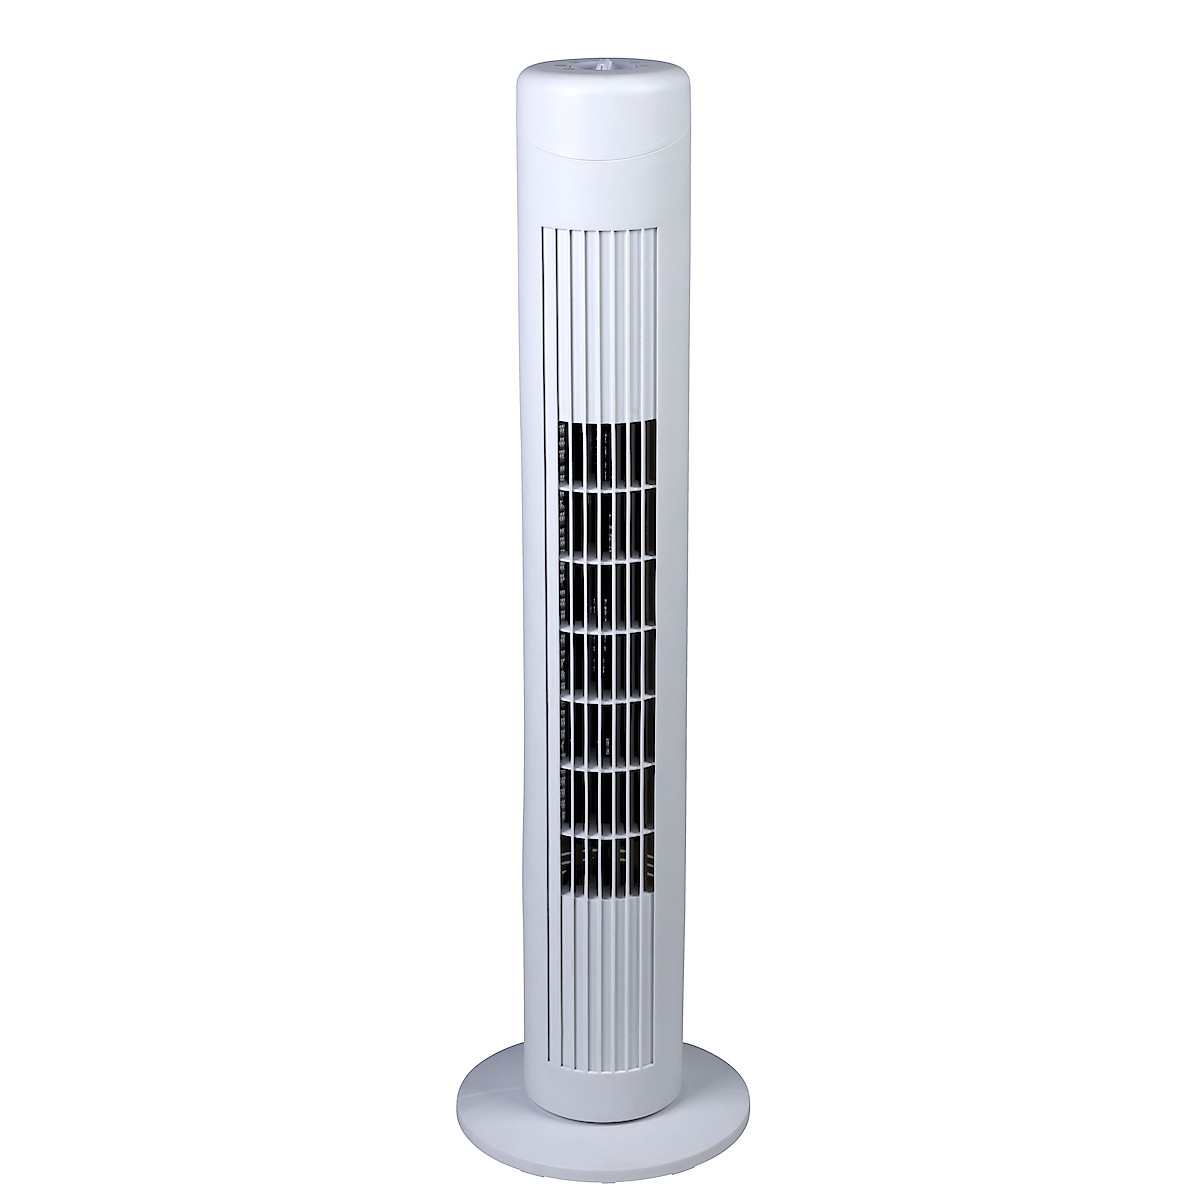 Tower Fan Clas Ohlson throughout proportions 1200 X 1200